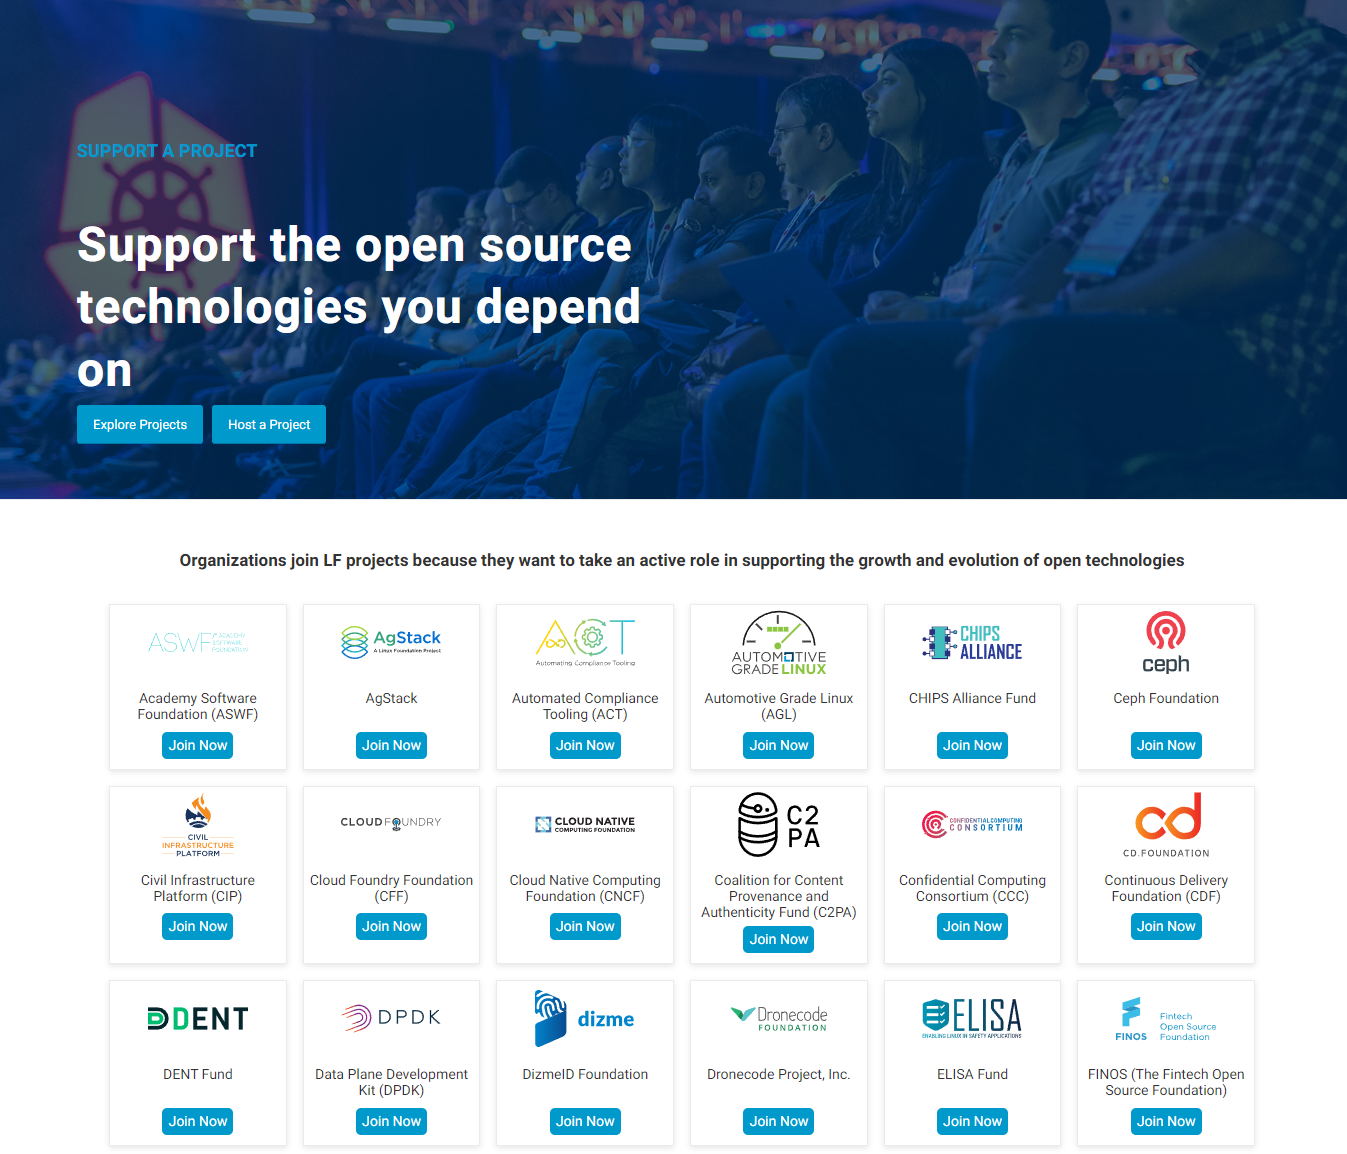 Linux Foundation product / service